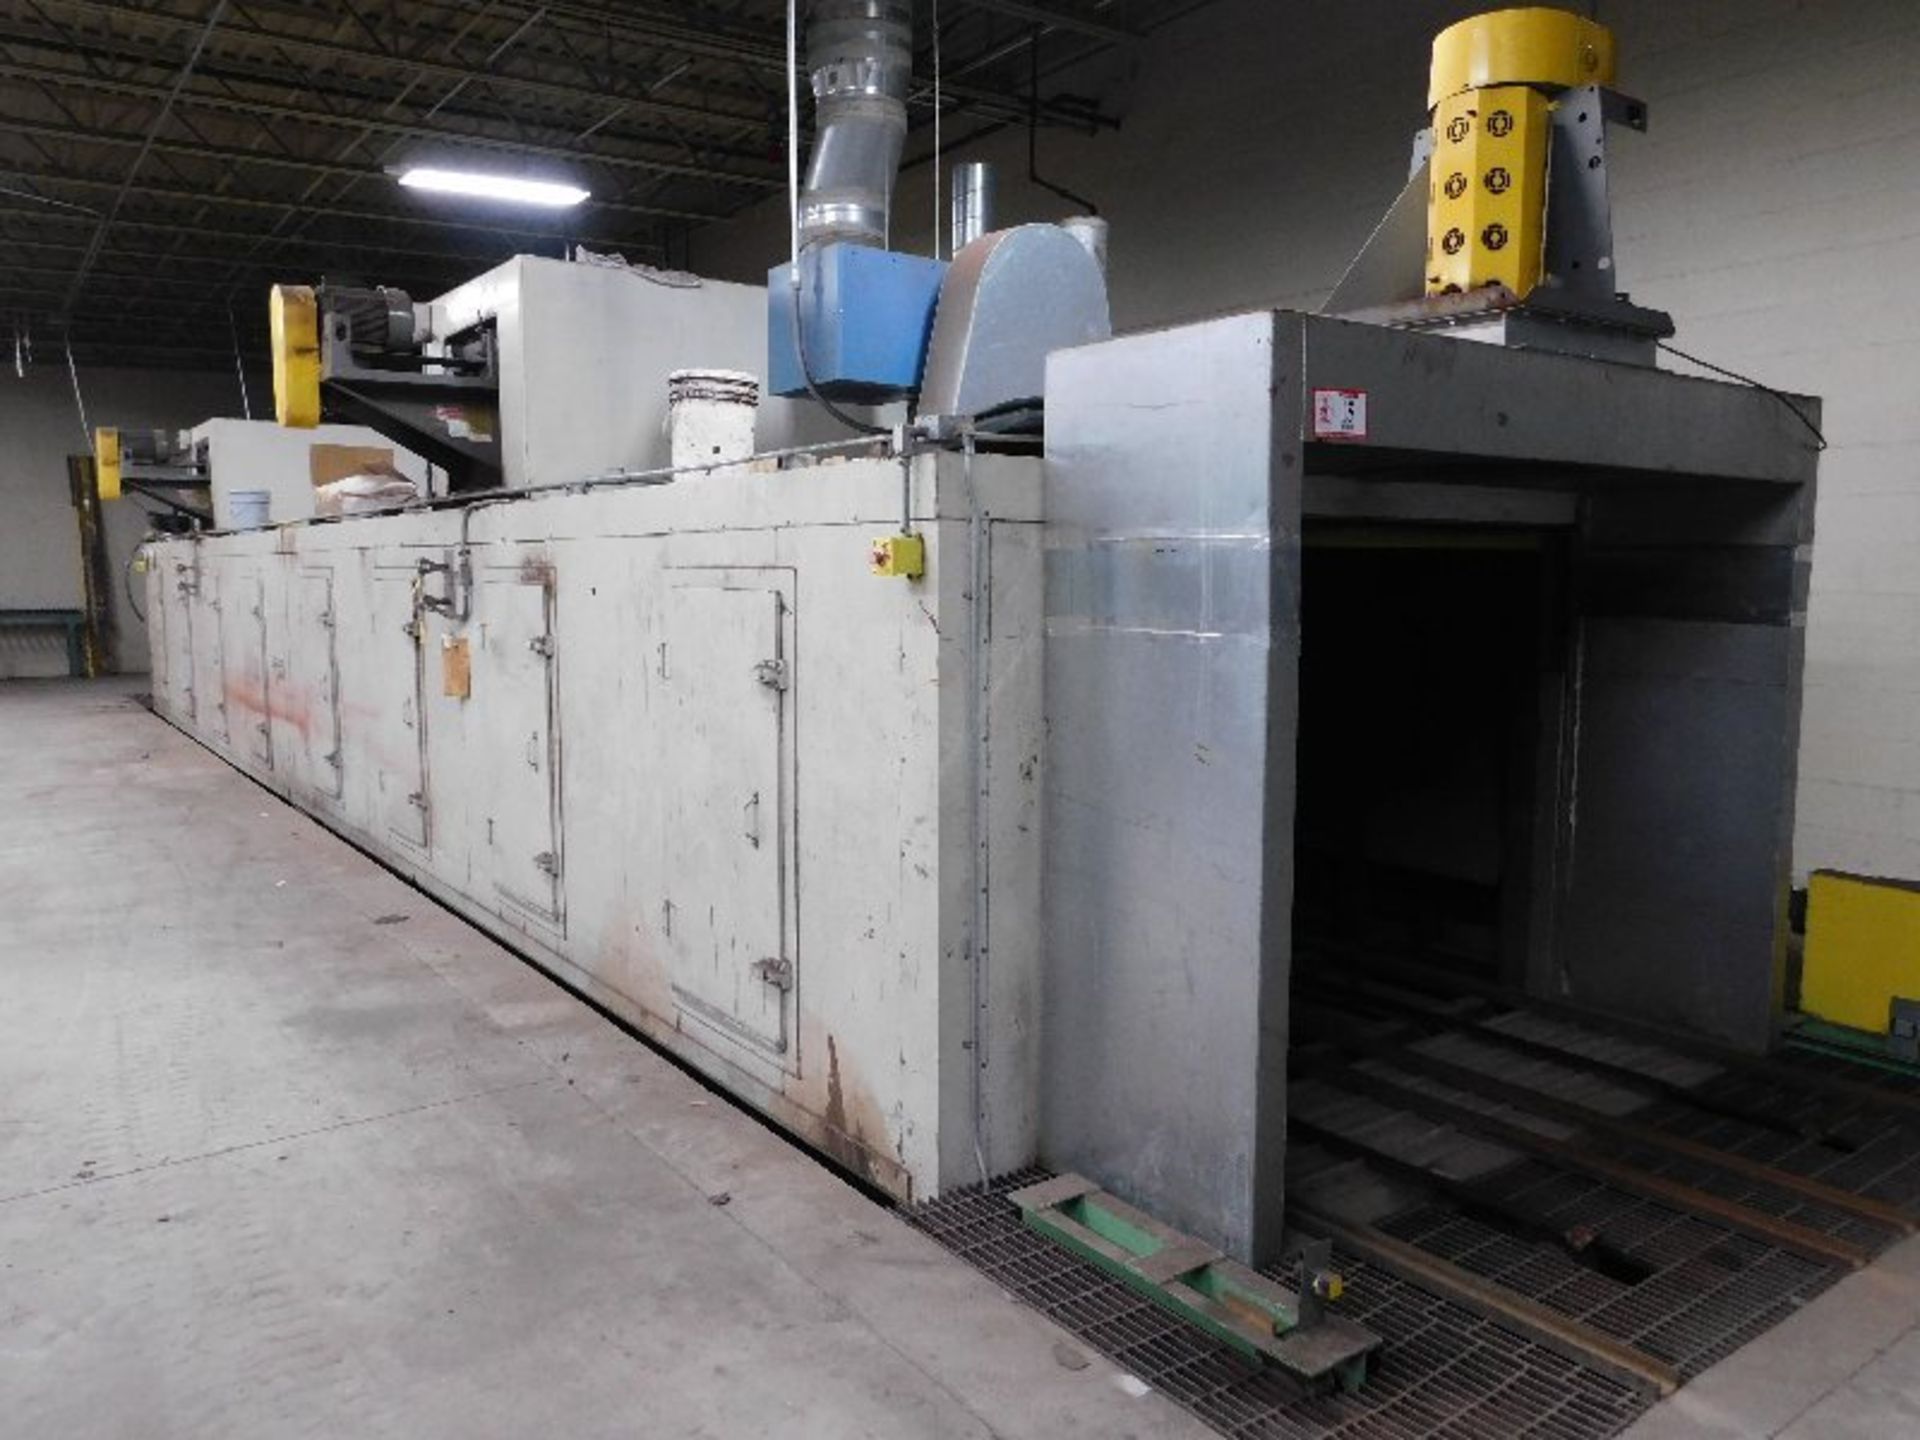 Maxon 40' Curing Oven, Dual Control, S-Fired, 6' X 5' Open, W/Chain Drive Conveyor